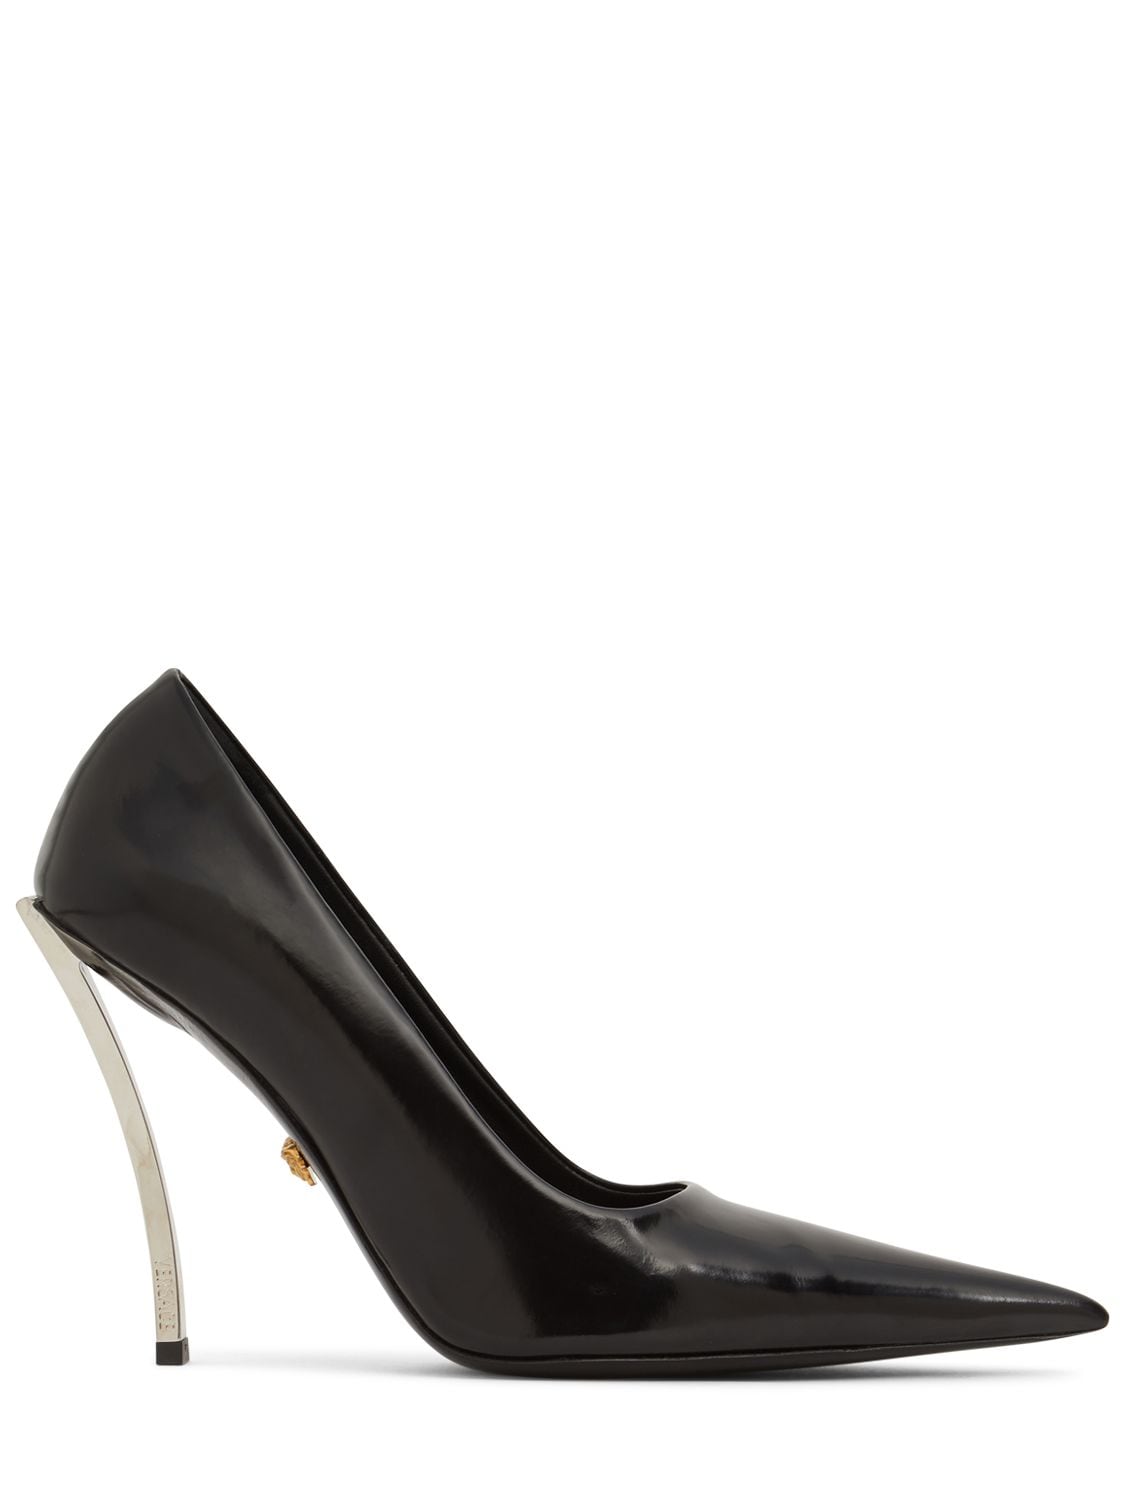 Versace 110mm Classic Leather Pumps In Black